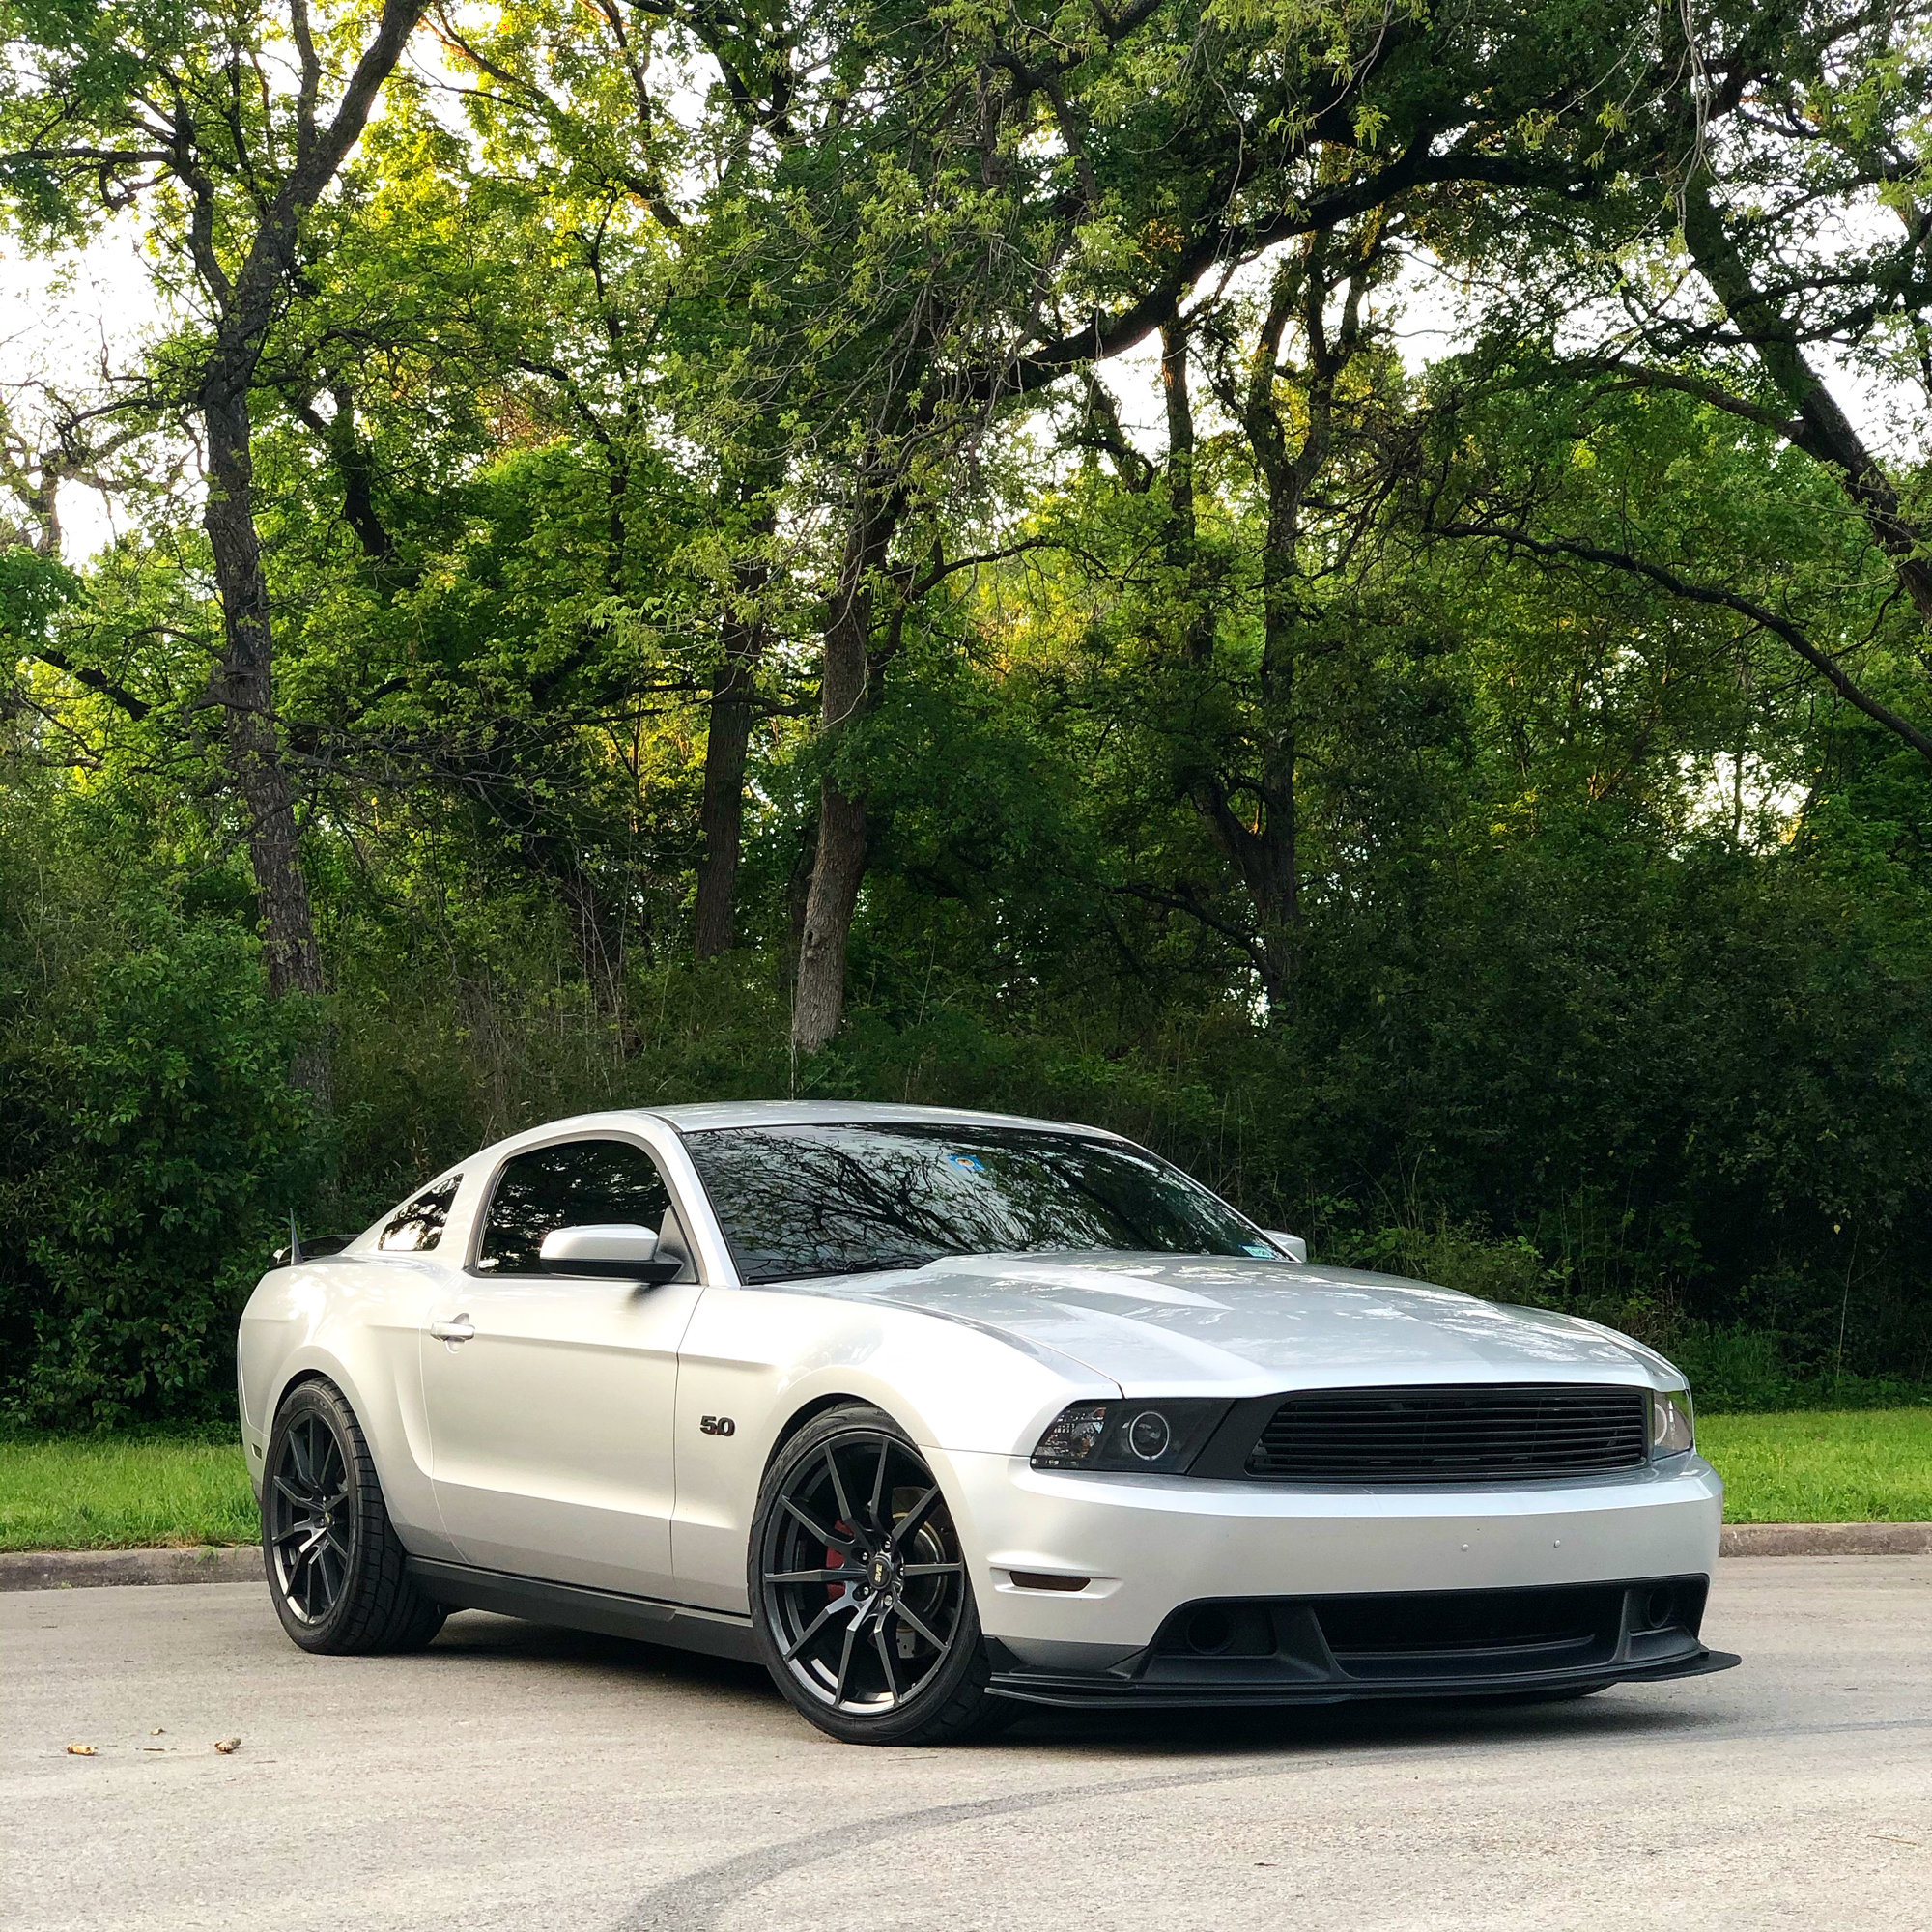 2012 Mustang
GT_50L  (Stealth_Coyote5.0)